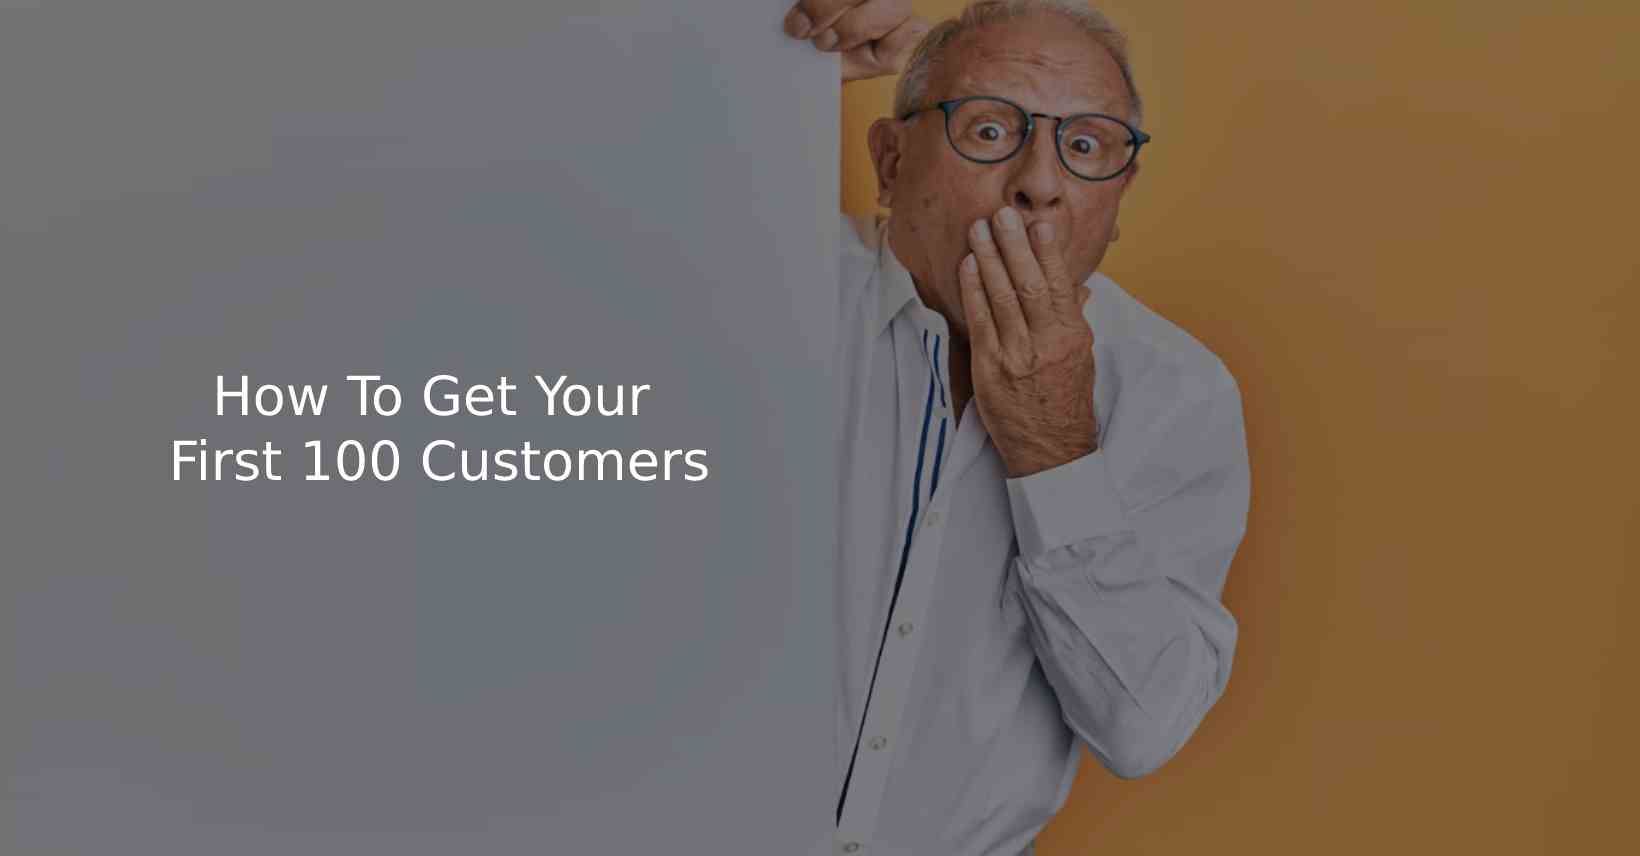 How To Get Your First 100 Customers